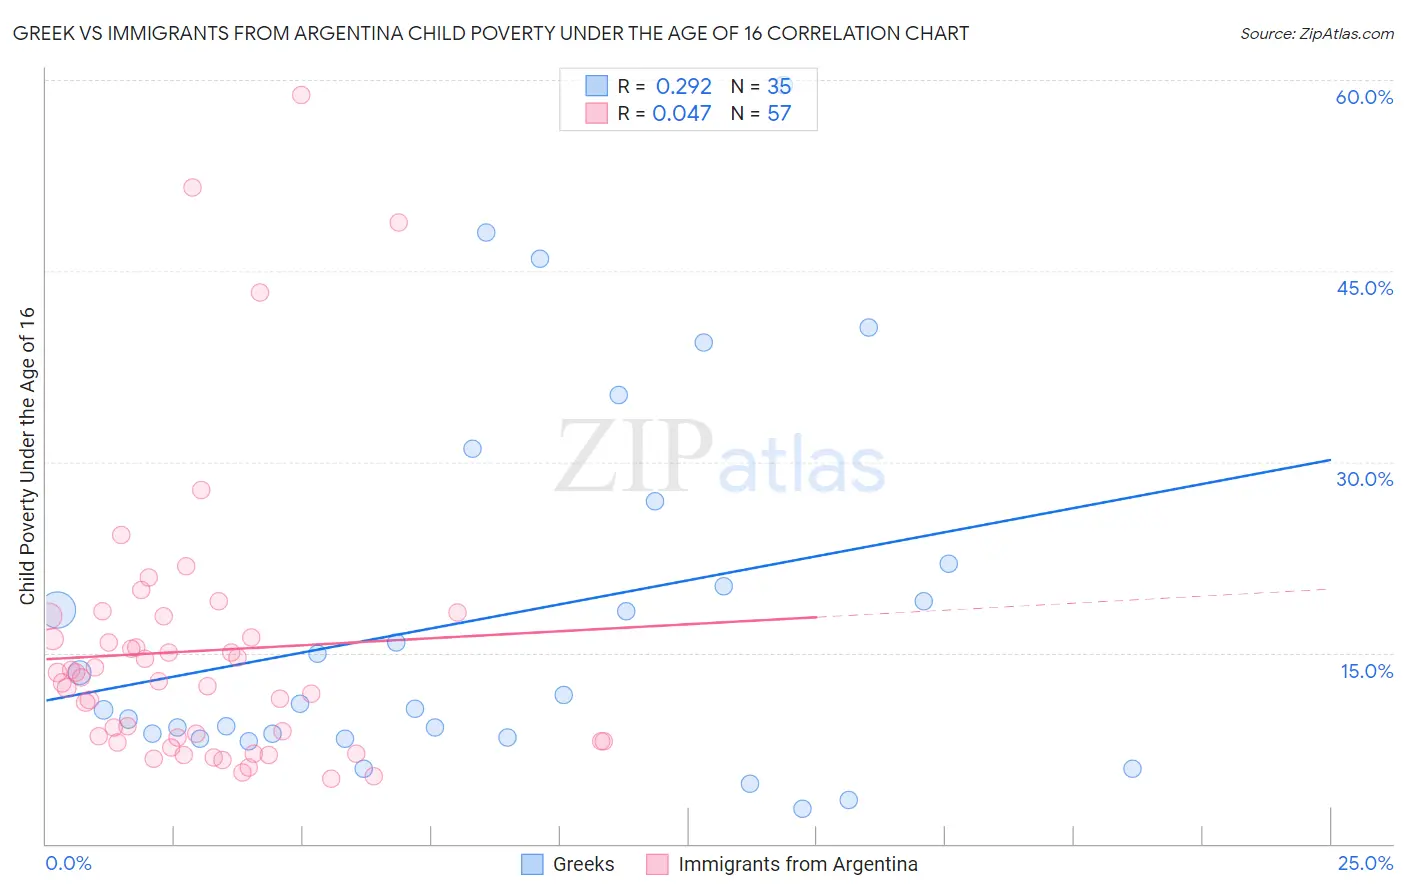 Greek vs Immigrants from Argentina Child Poverty Under the Age of 16